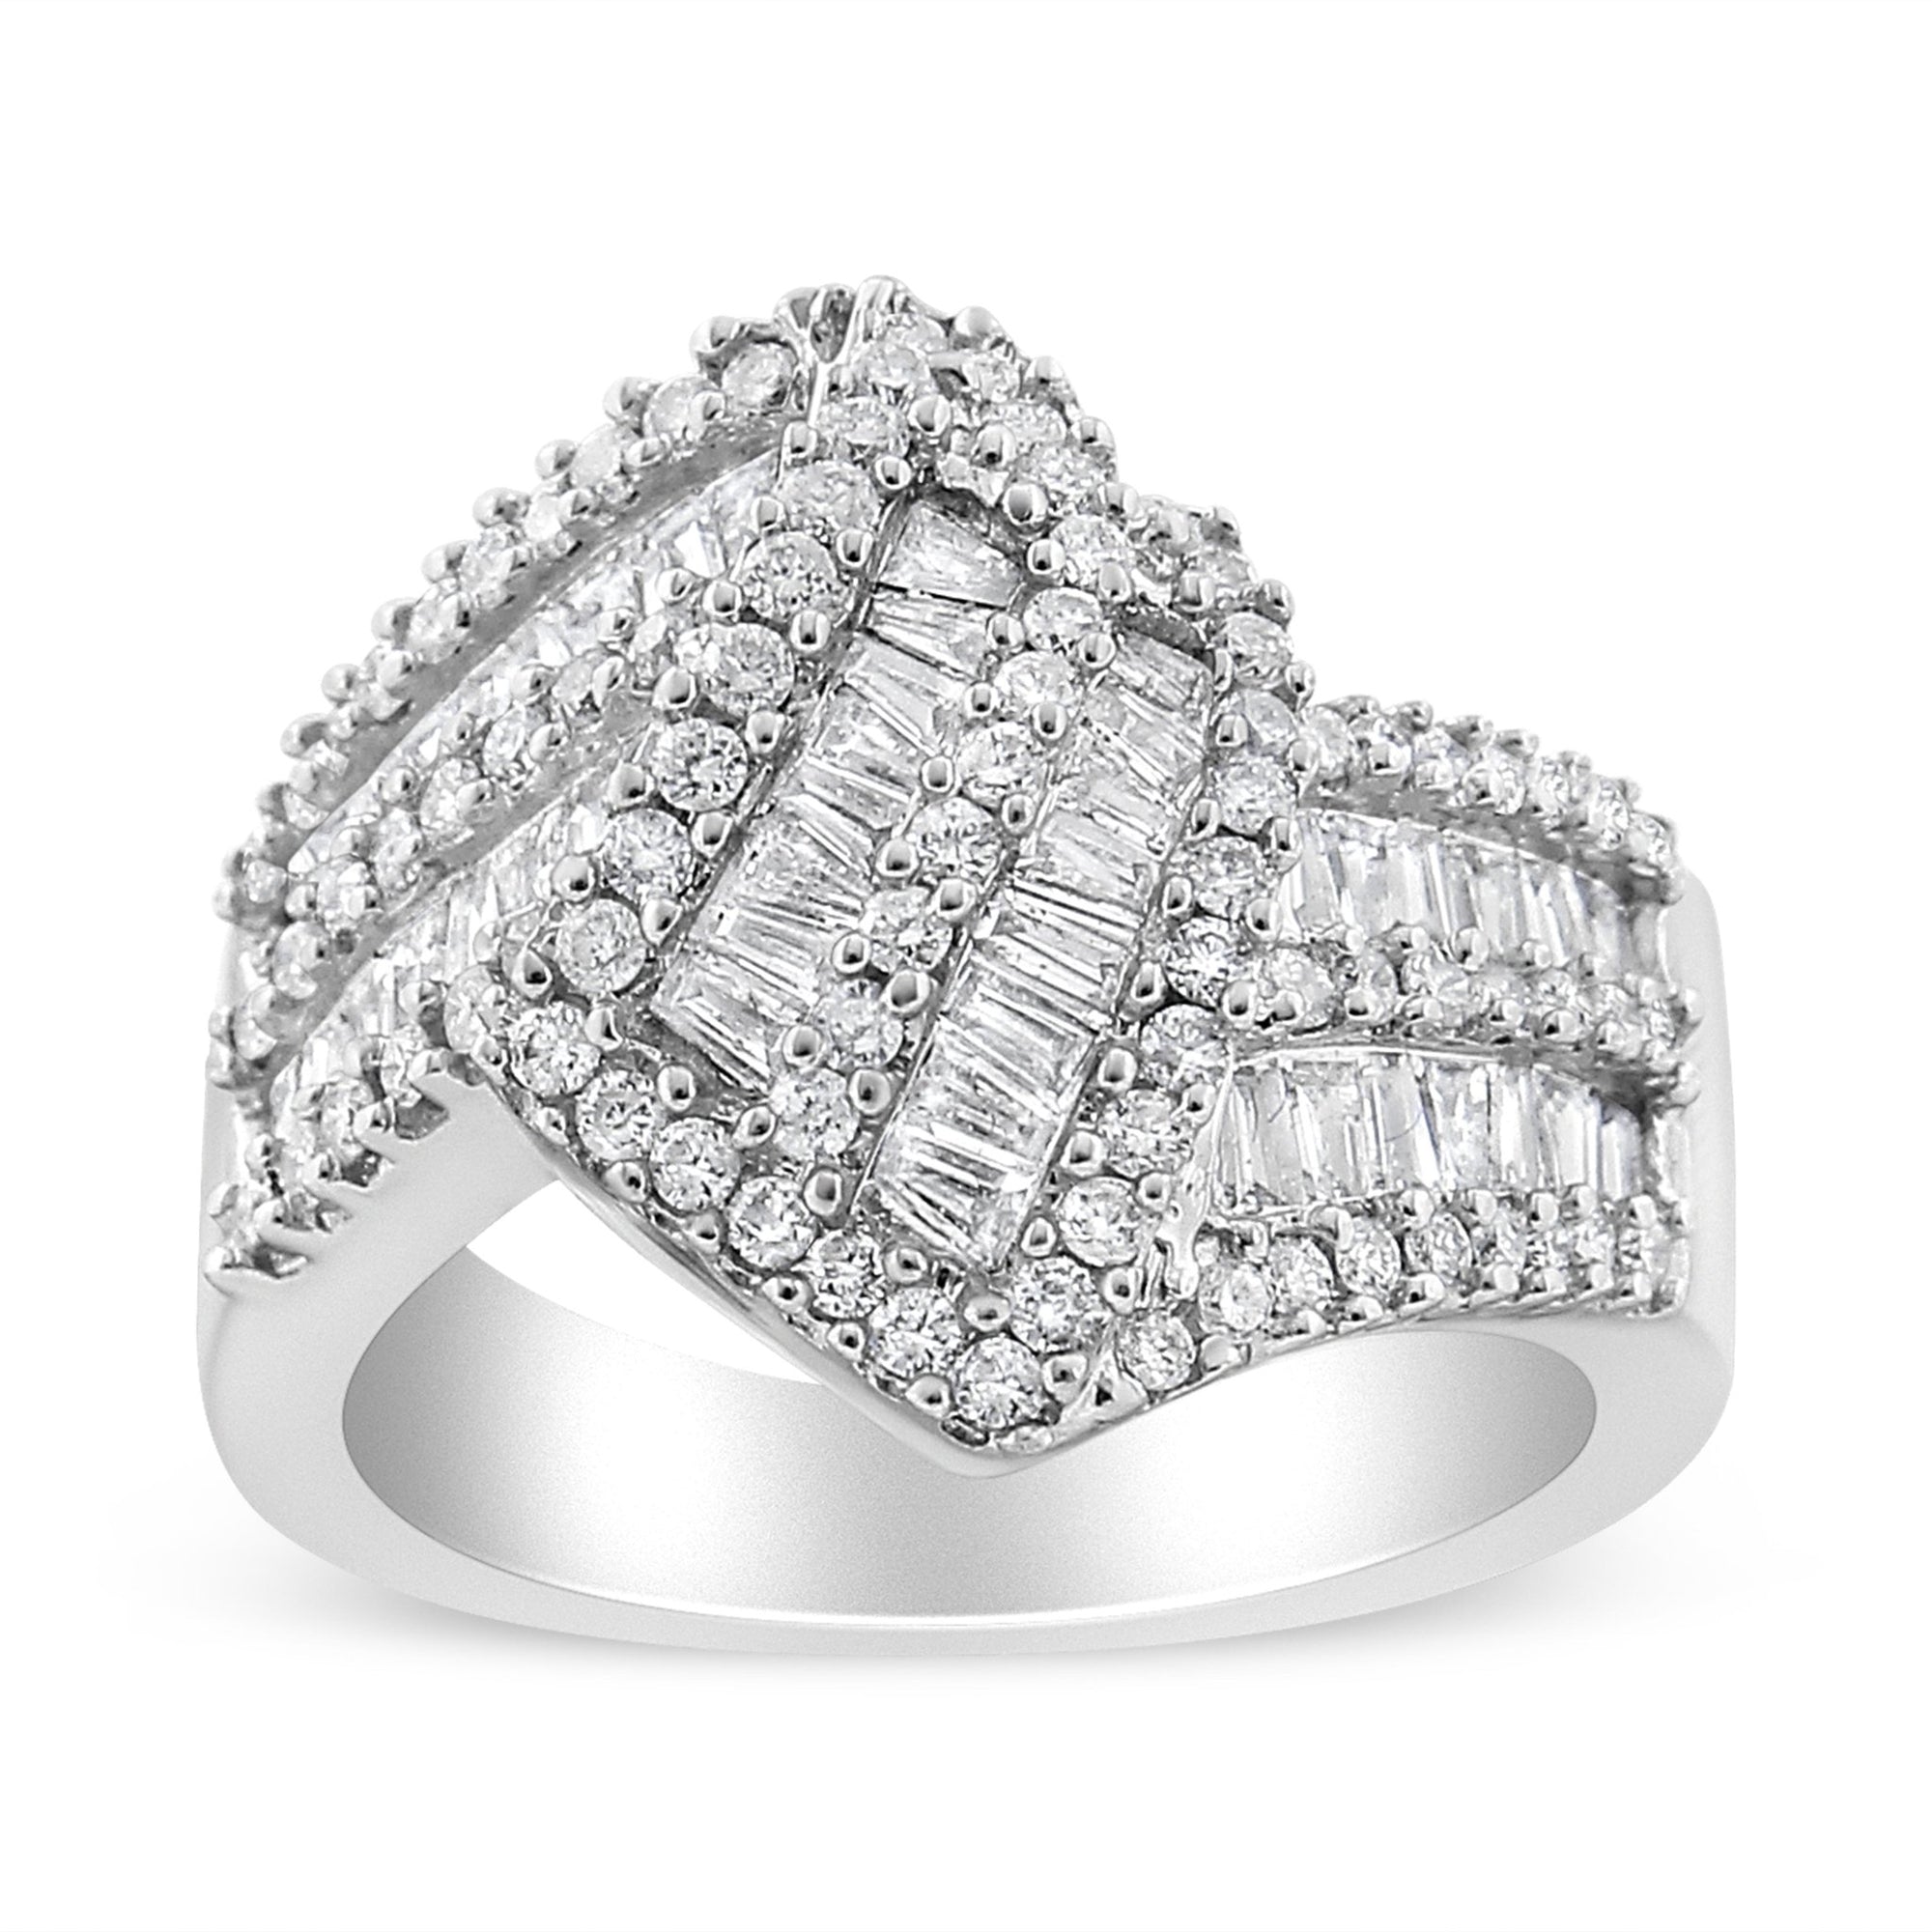 14K White Gold 1-1/2 Cttw Round and Baguette Diamond Bypass Cocktail Ring Band (H-I Color, SI1-SI2 Clarity) - Size 7 - LinkagejewelrydesignLinkagejewelrydesign